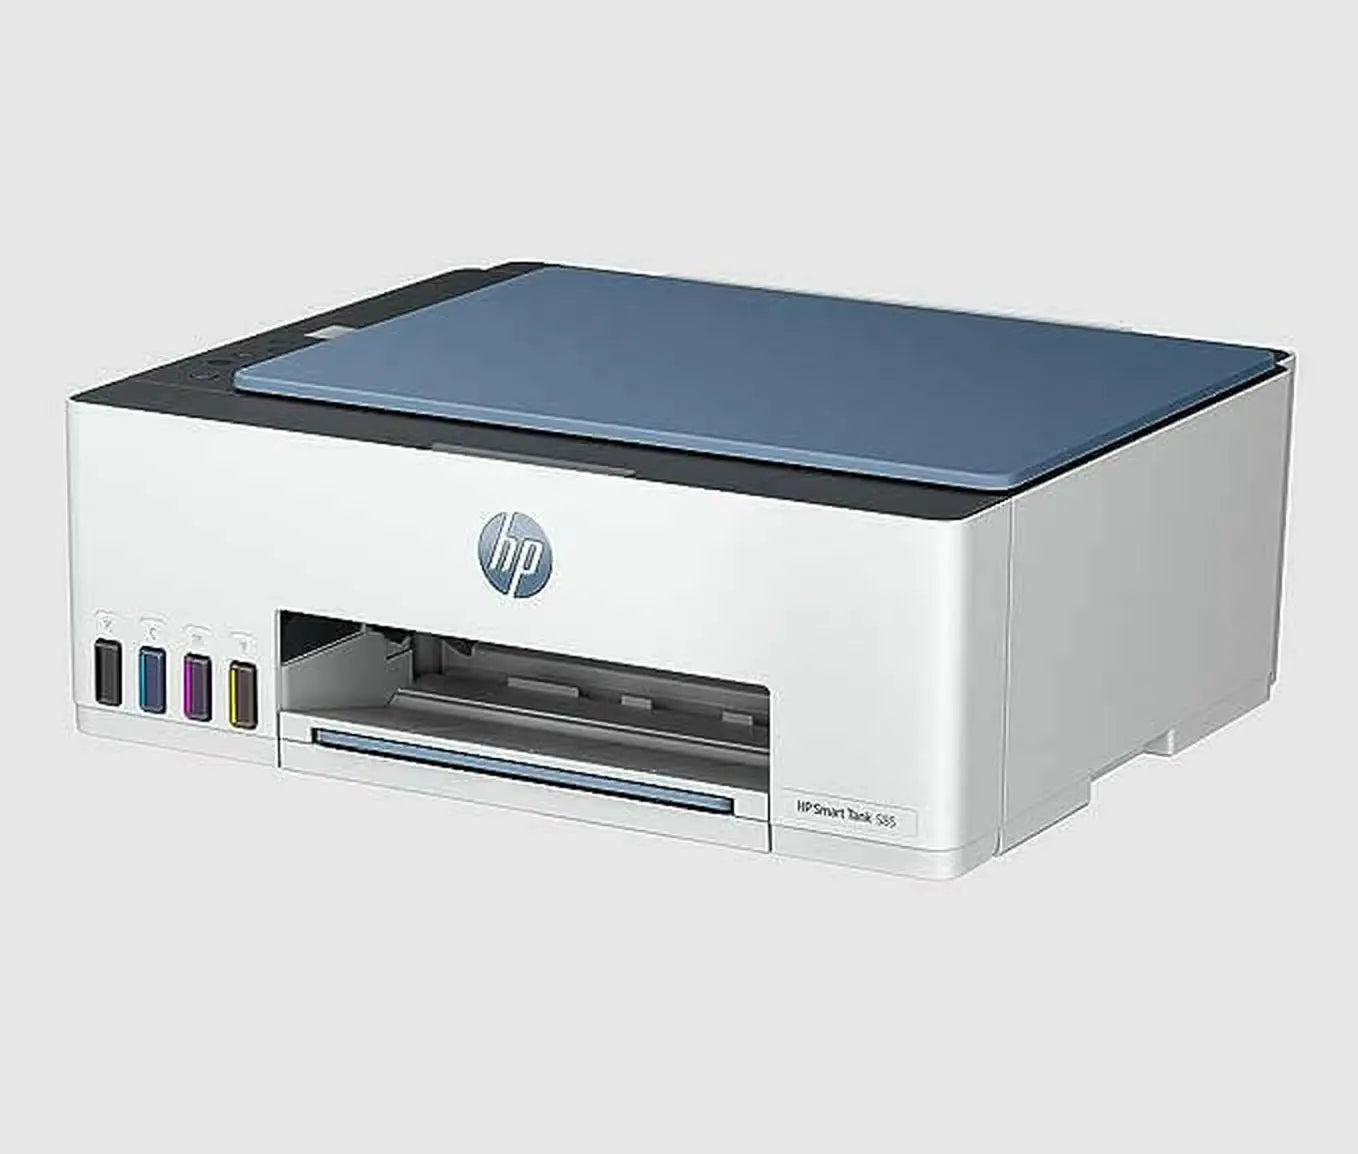 HP Smart Tank 585 Printer Wireless, Print, Scan, Copy, All In One Printer, Up to 3 years of printing already included* - Dark Surf Blue